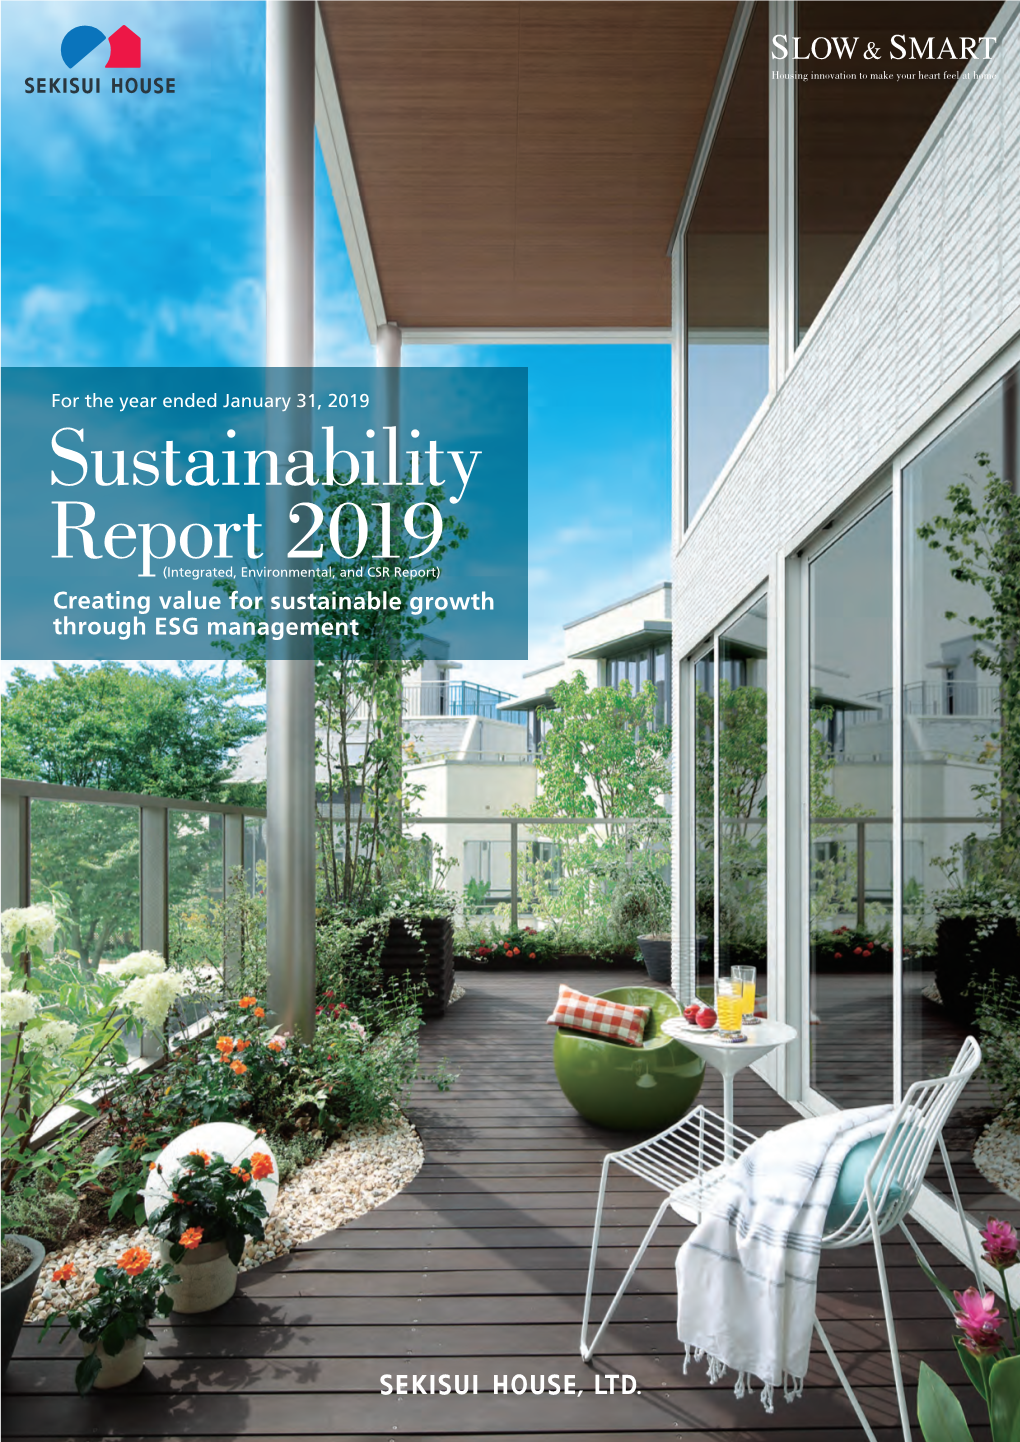 Sustainability Report 2019 Housing Innovation to Make Your Heart Feel at Home for the Year Ended January 31, 2019